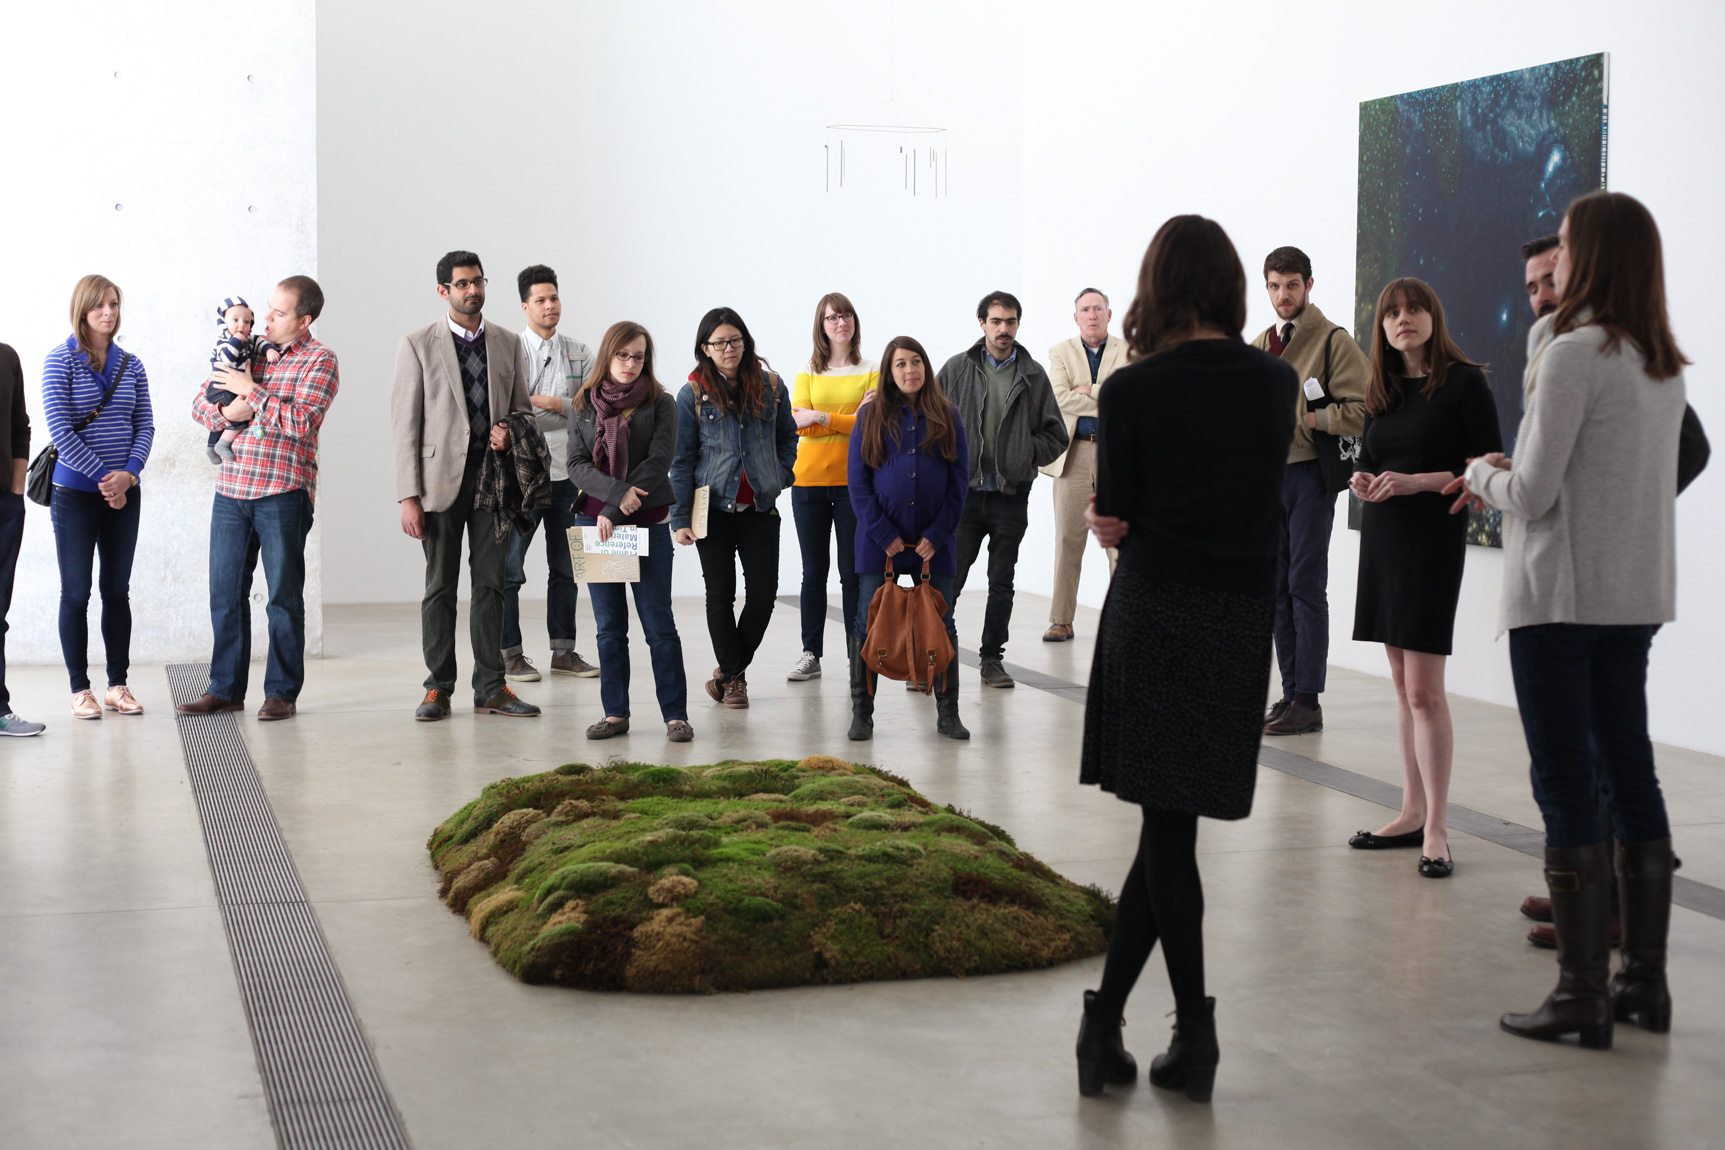 Event facilitators speak to participants in the Main Gallery, gathered around Meg Webster's piece "Moss Bed, Queen."